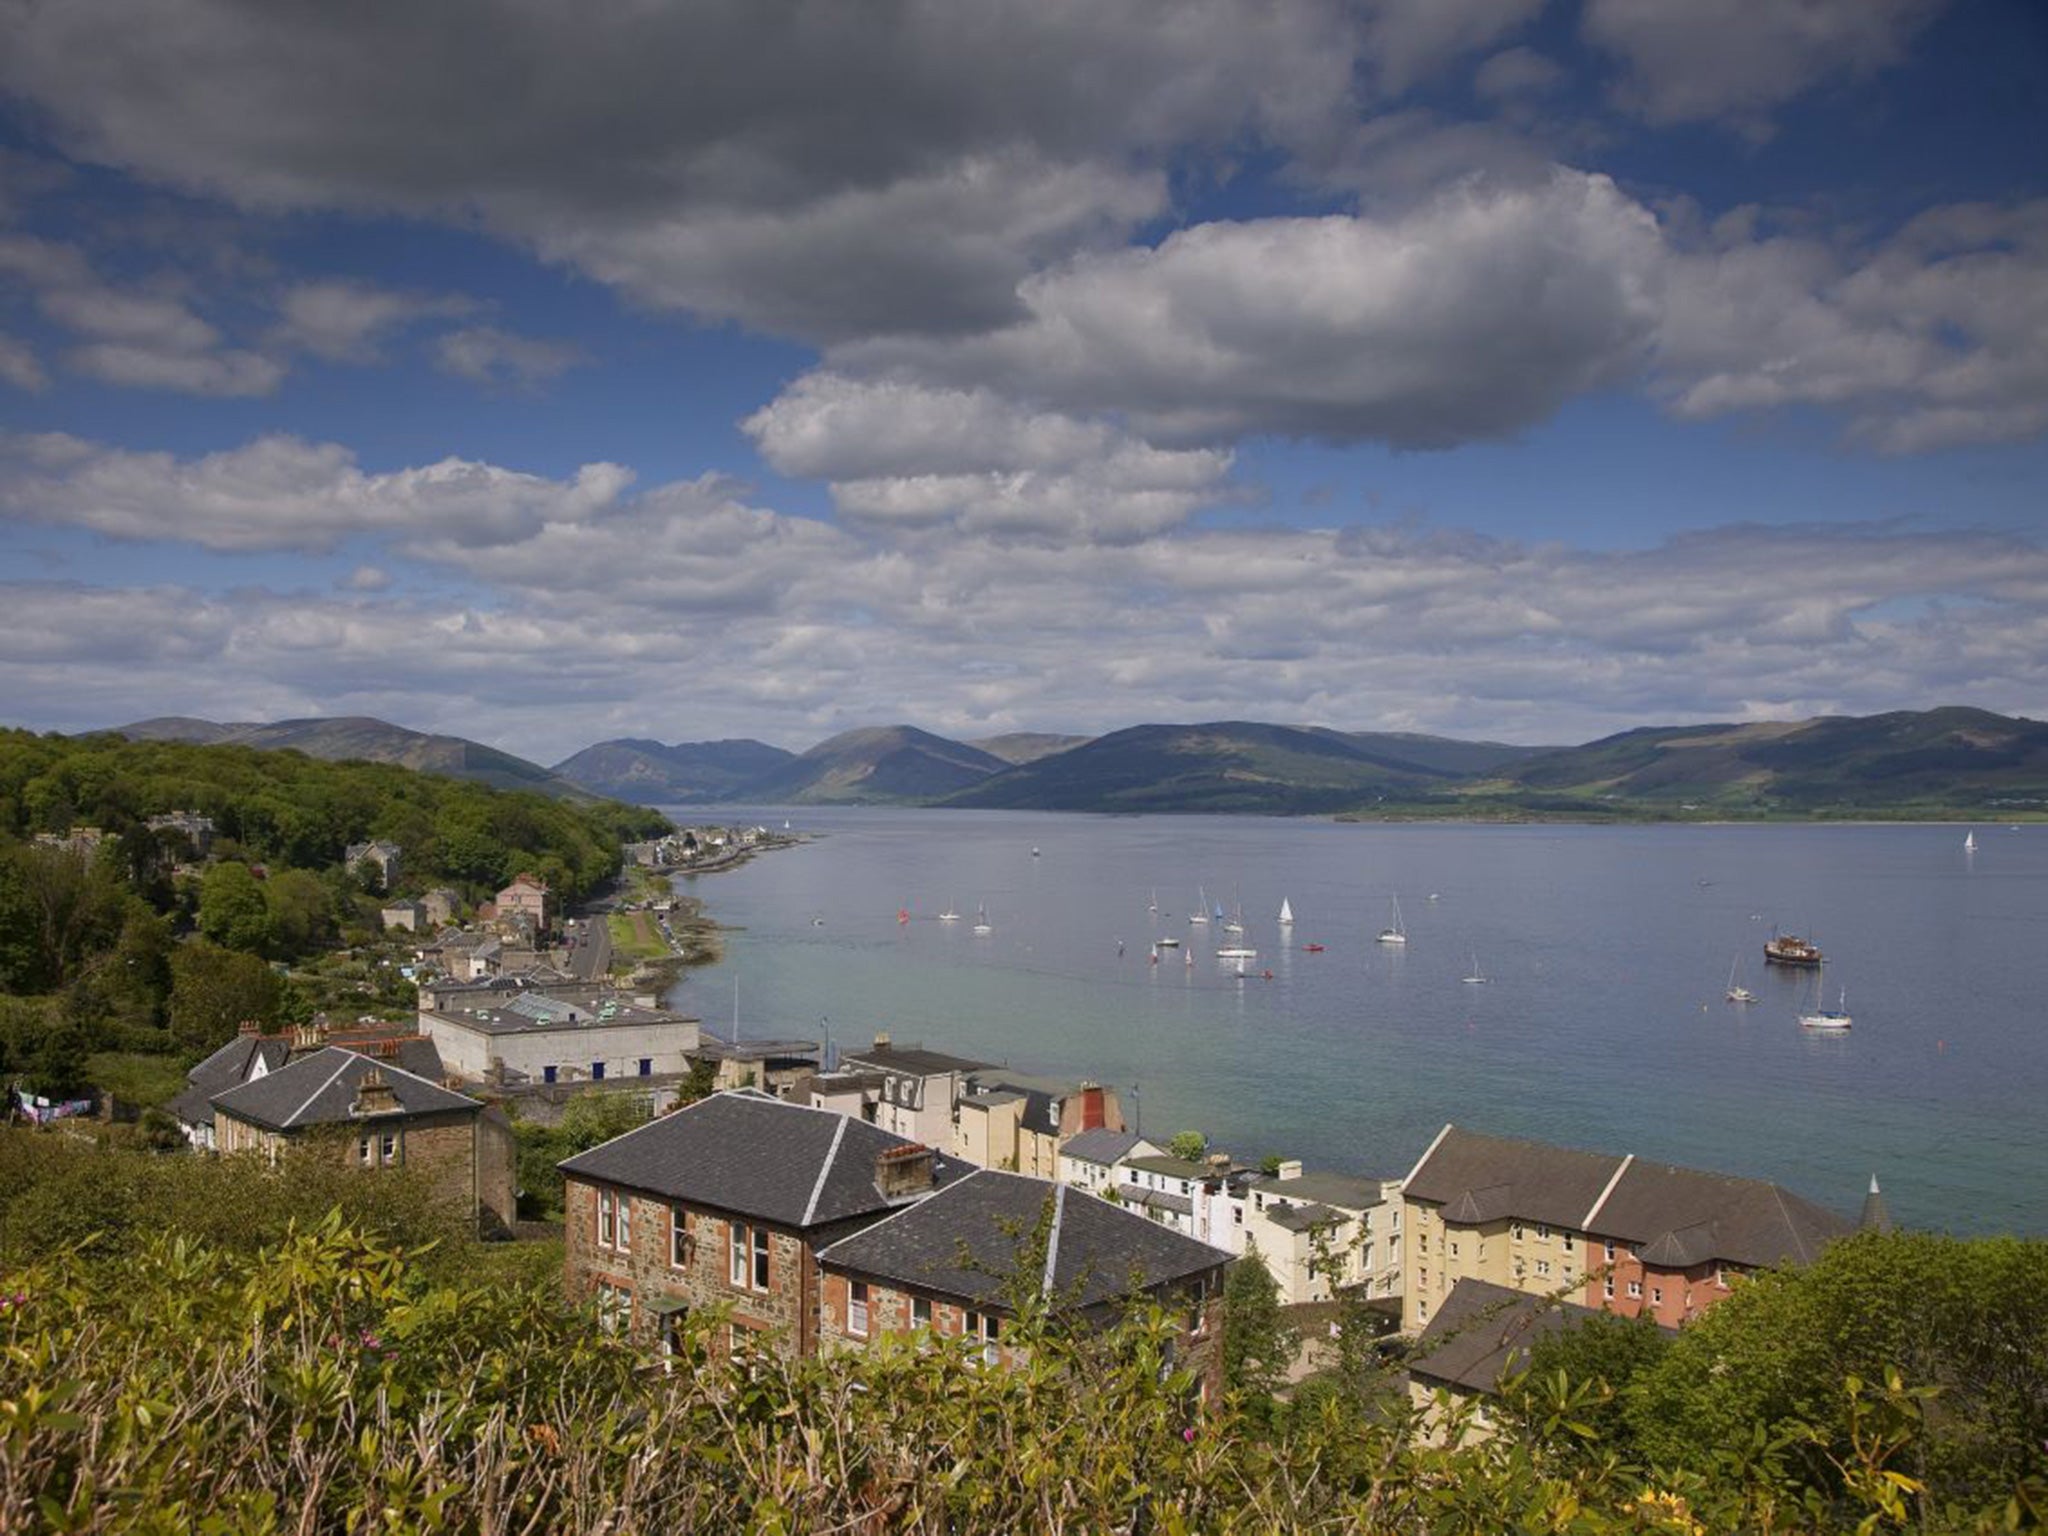 A view of Rothesay Bay, on the isle of Bute